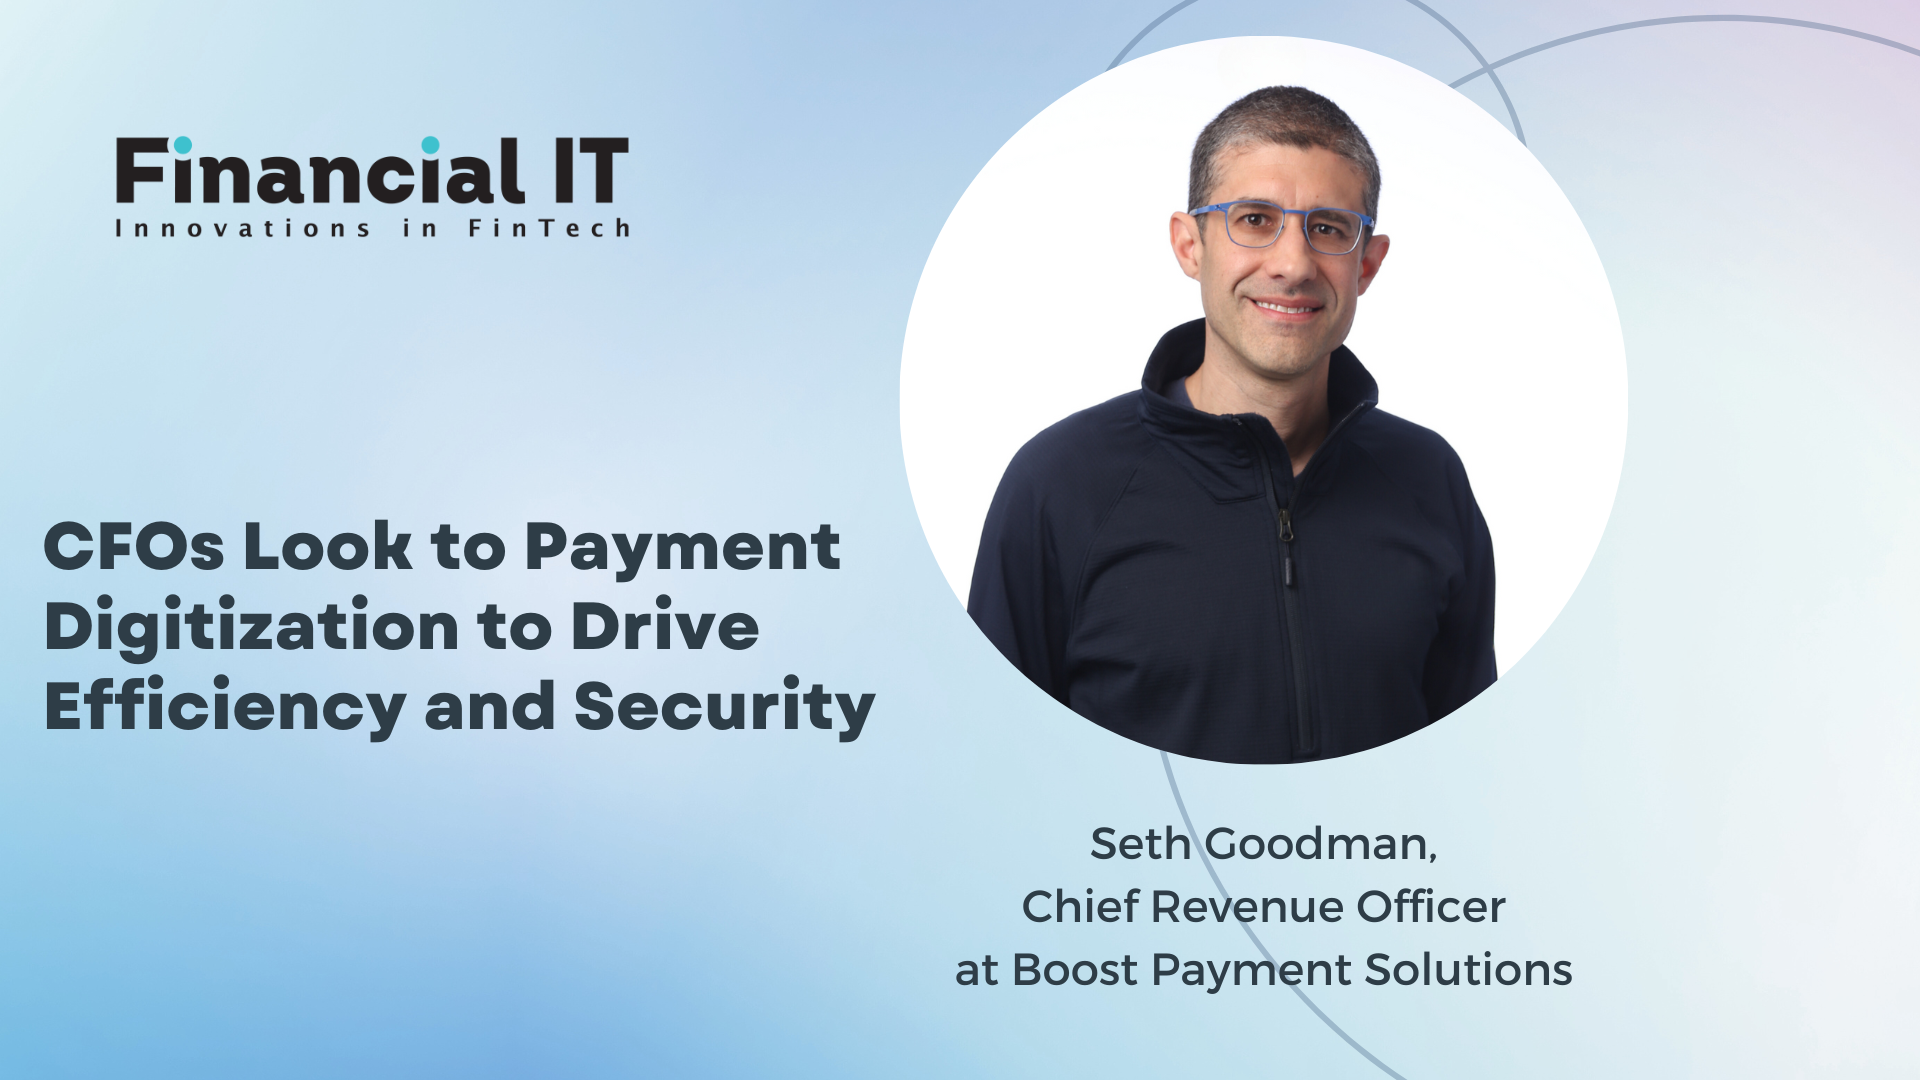 CFOs Look to Payment Digitization to Drive Efficiency and Security